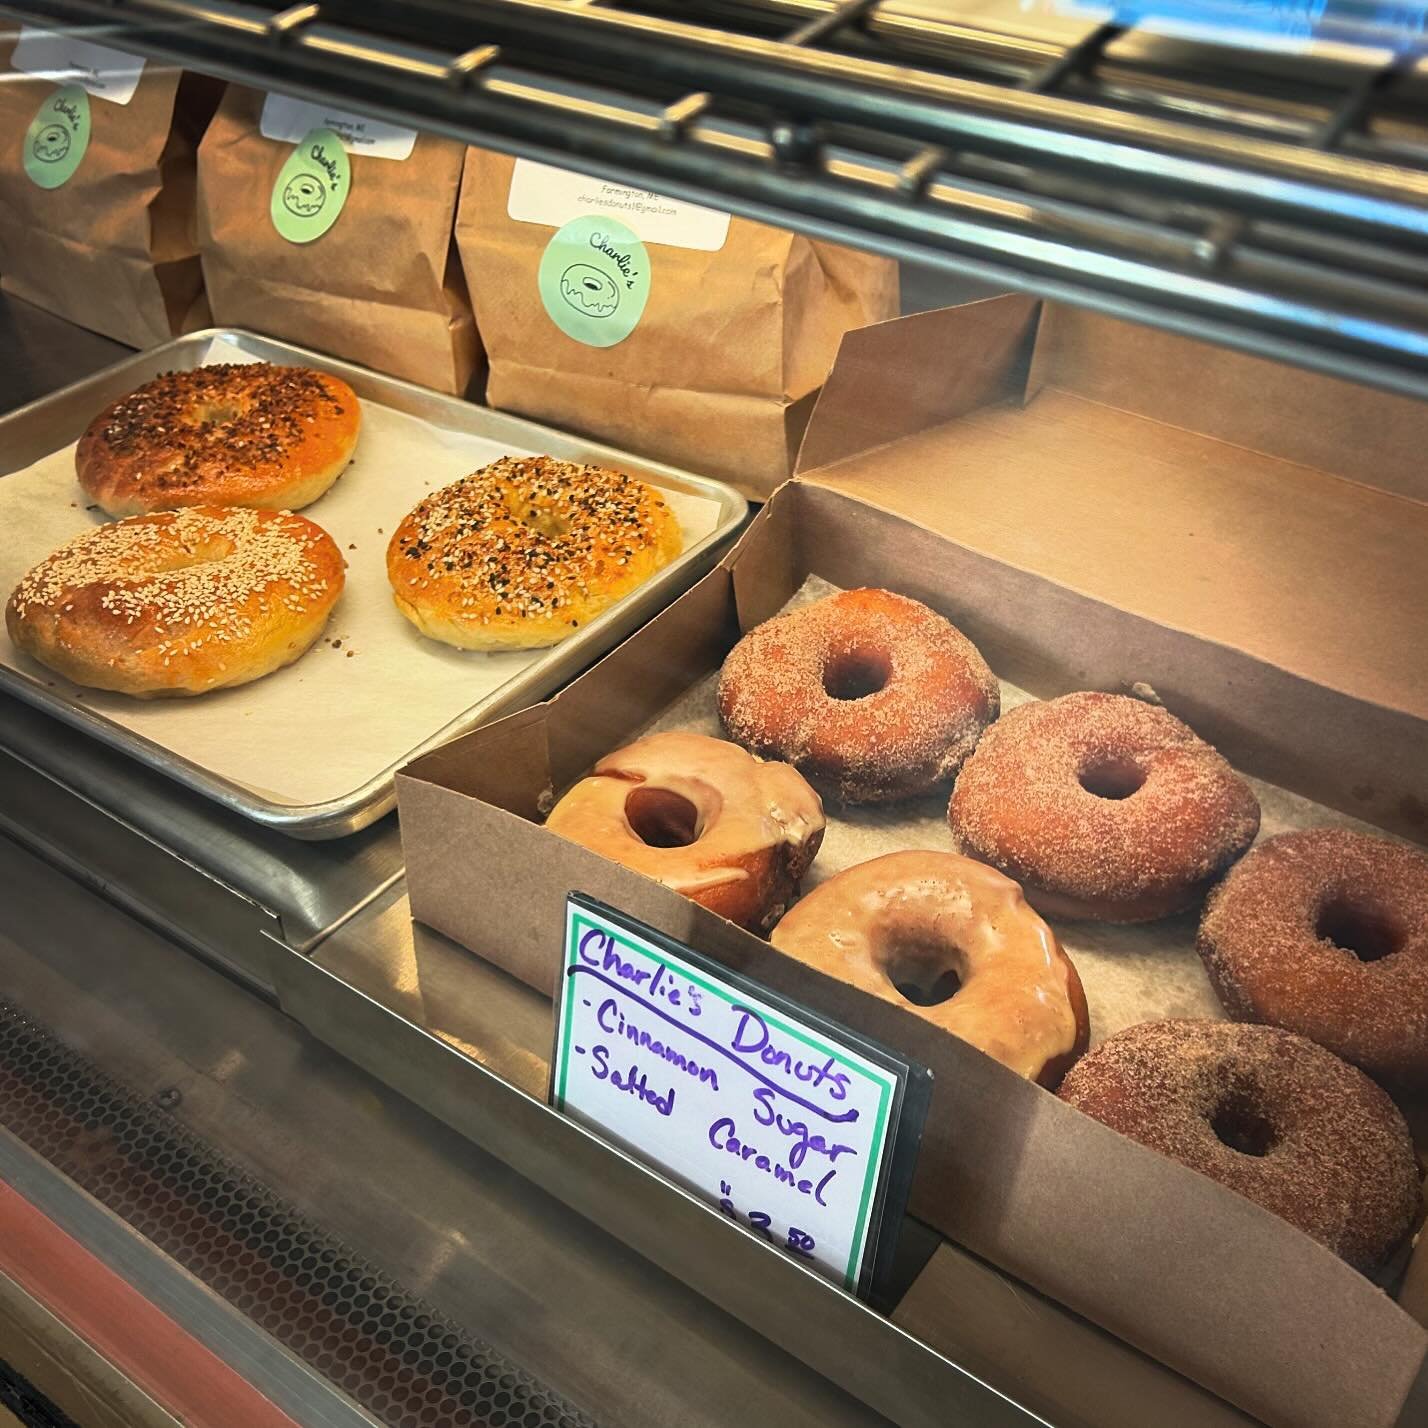 FRIDAY! Satifsfy you sweet tooth this morning! Fresh donuts (and bagels) from @donuts_farm 🍩🥯 PLUS! Sourdough Blueberry Pancakes 🥞 are back!
☀️☀️☀️
C&rsquo;mon down or order takeout online at www.rootdownmarket.com